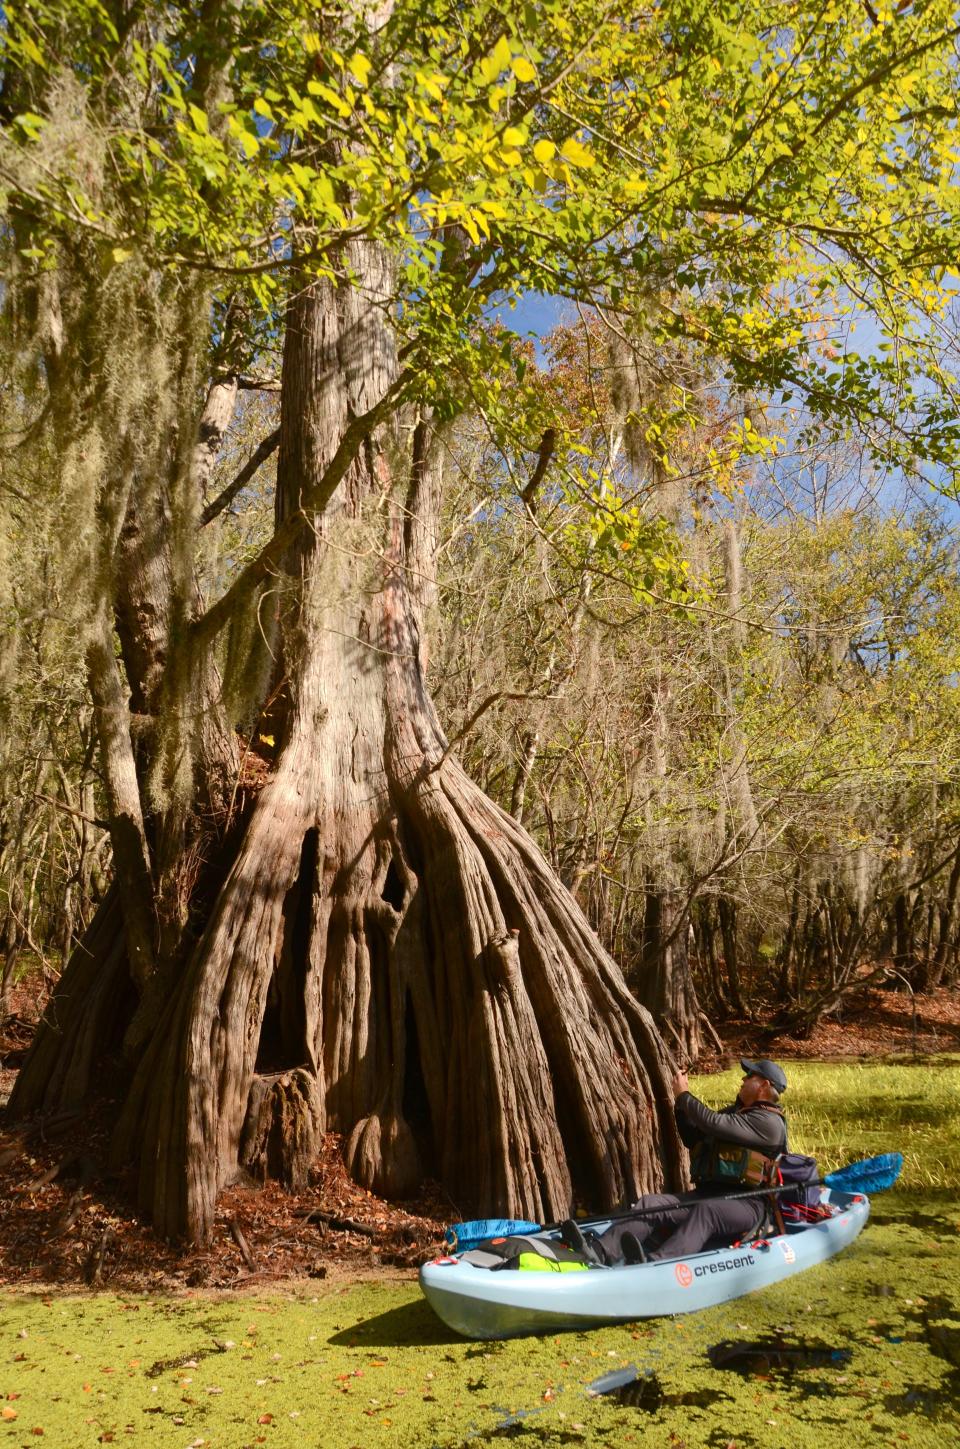 A paddler inspects a cypress tree on Ebenezer Creek in Effingham County. While the Clean Water Act affords protection for larger bodies of water like Ebenezer Creek, smaller streams and wetlands in the area have had protections questioned by recent federal rules.